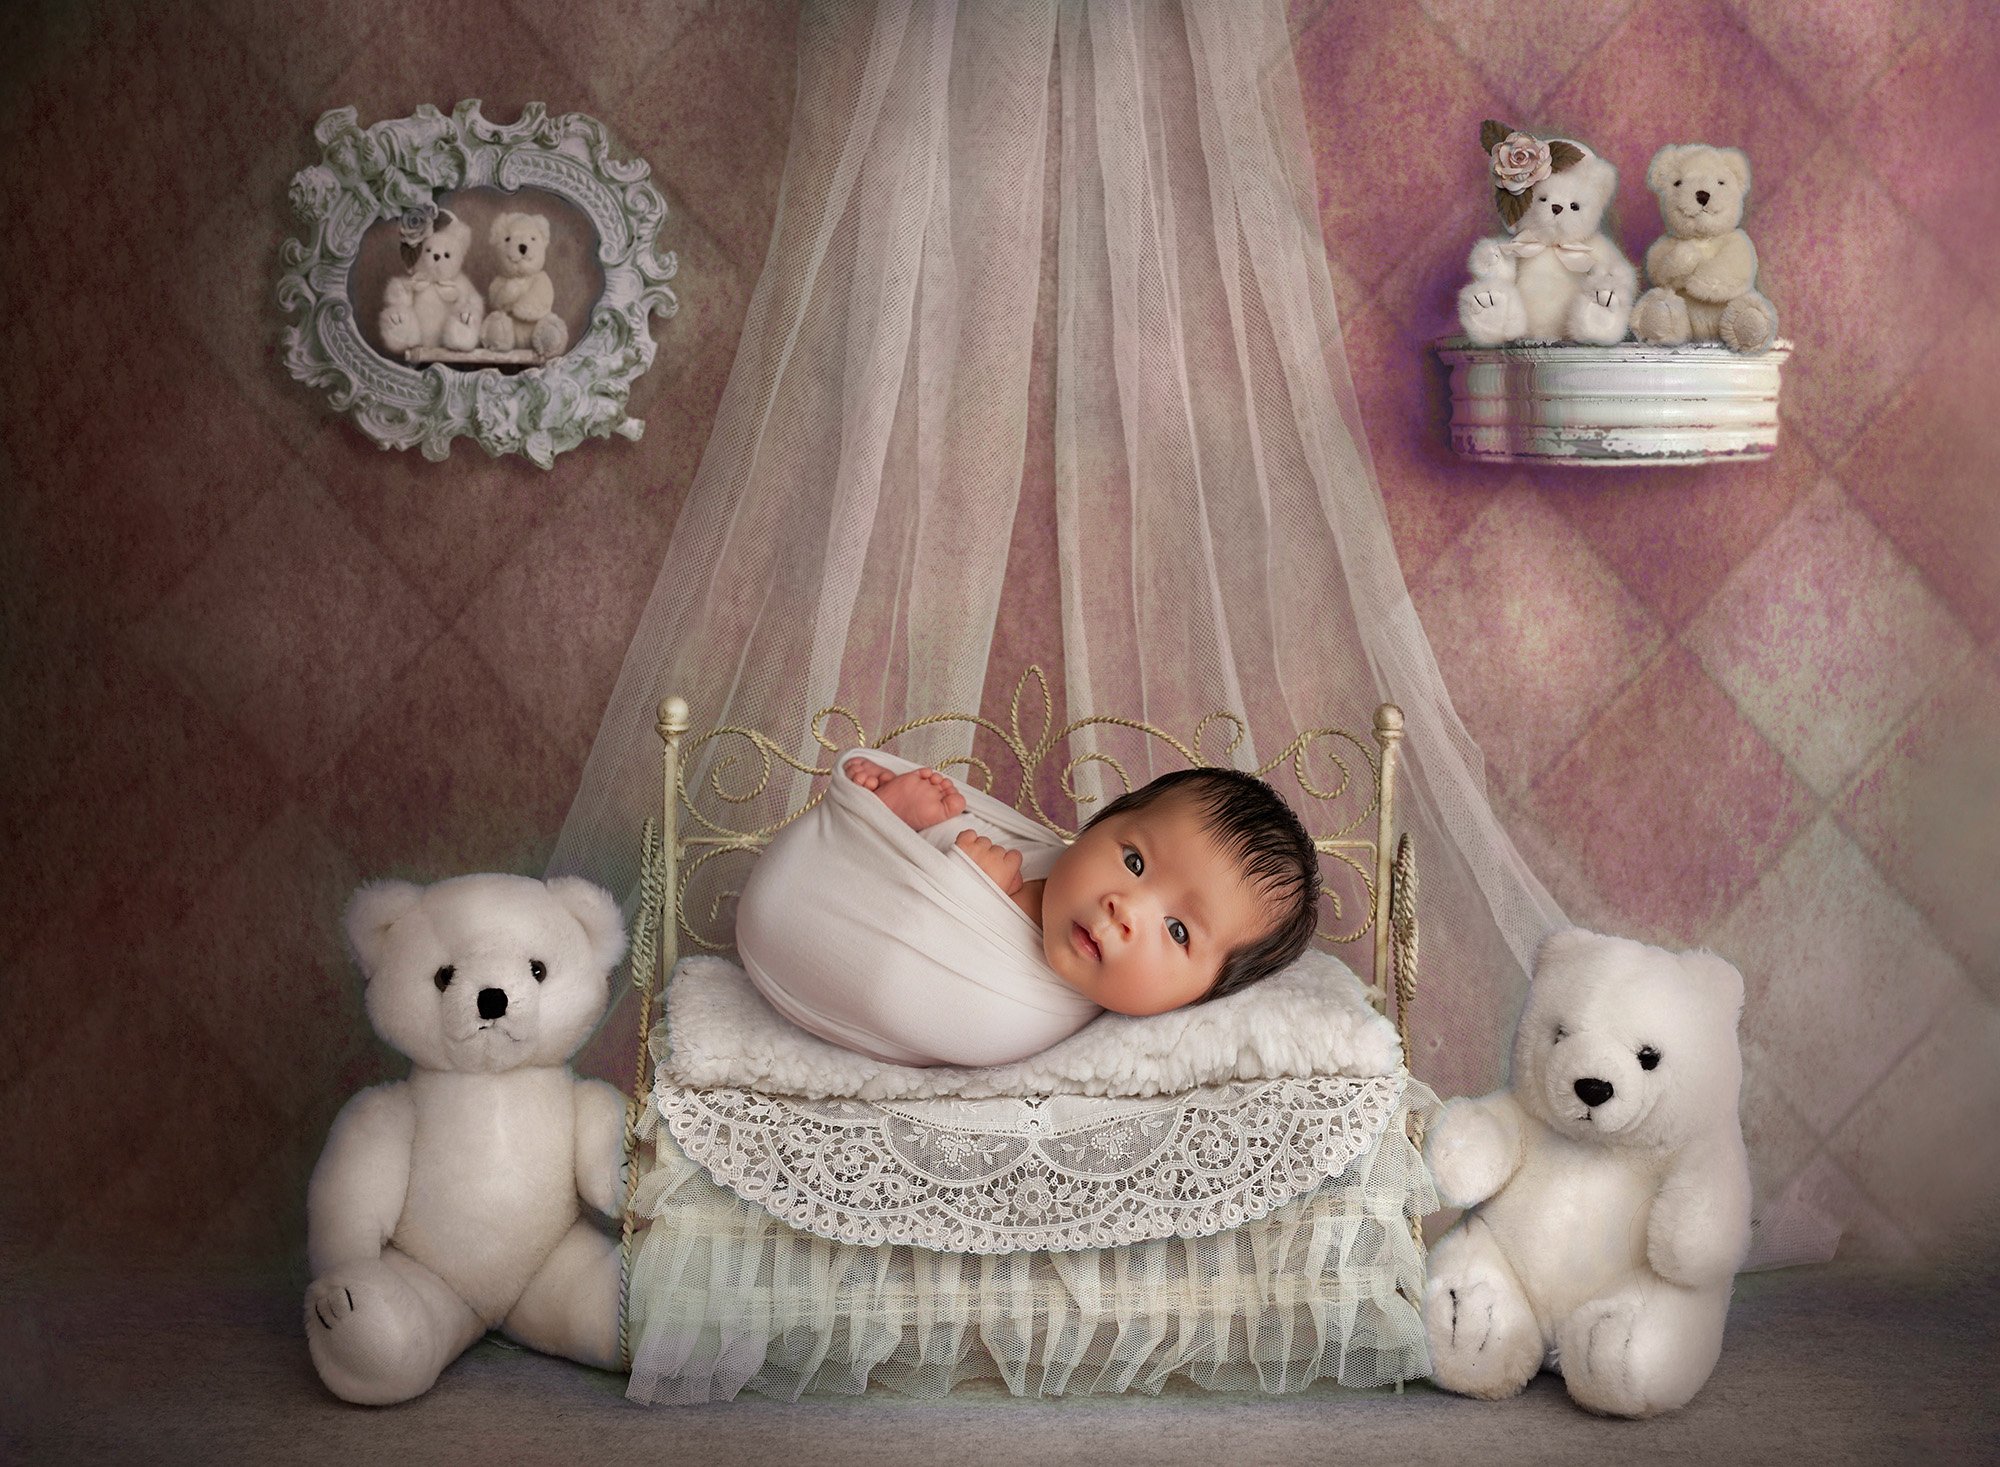 awake newborn baby girl laying in miniature princess bed surrounded by stuffed animal bears on a pink diamond background